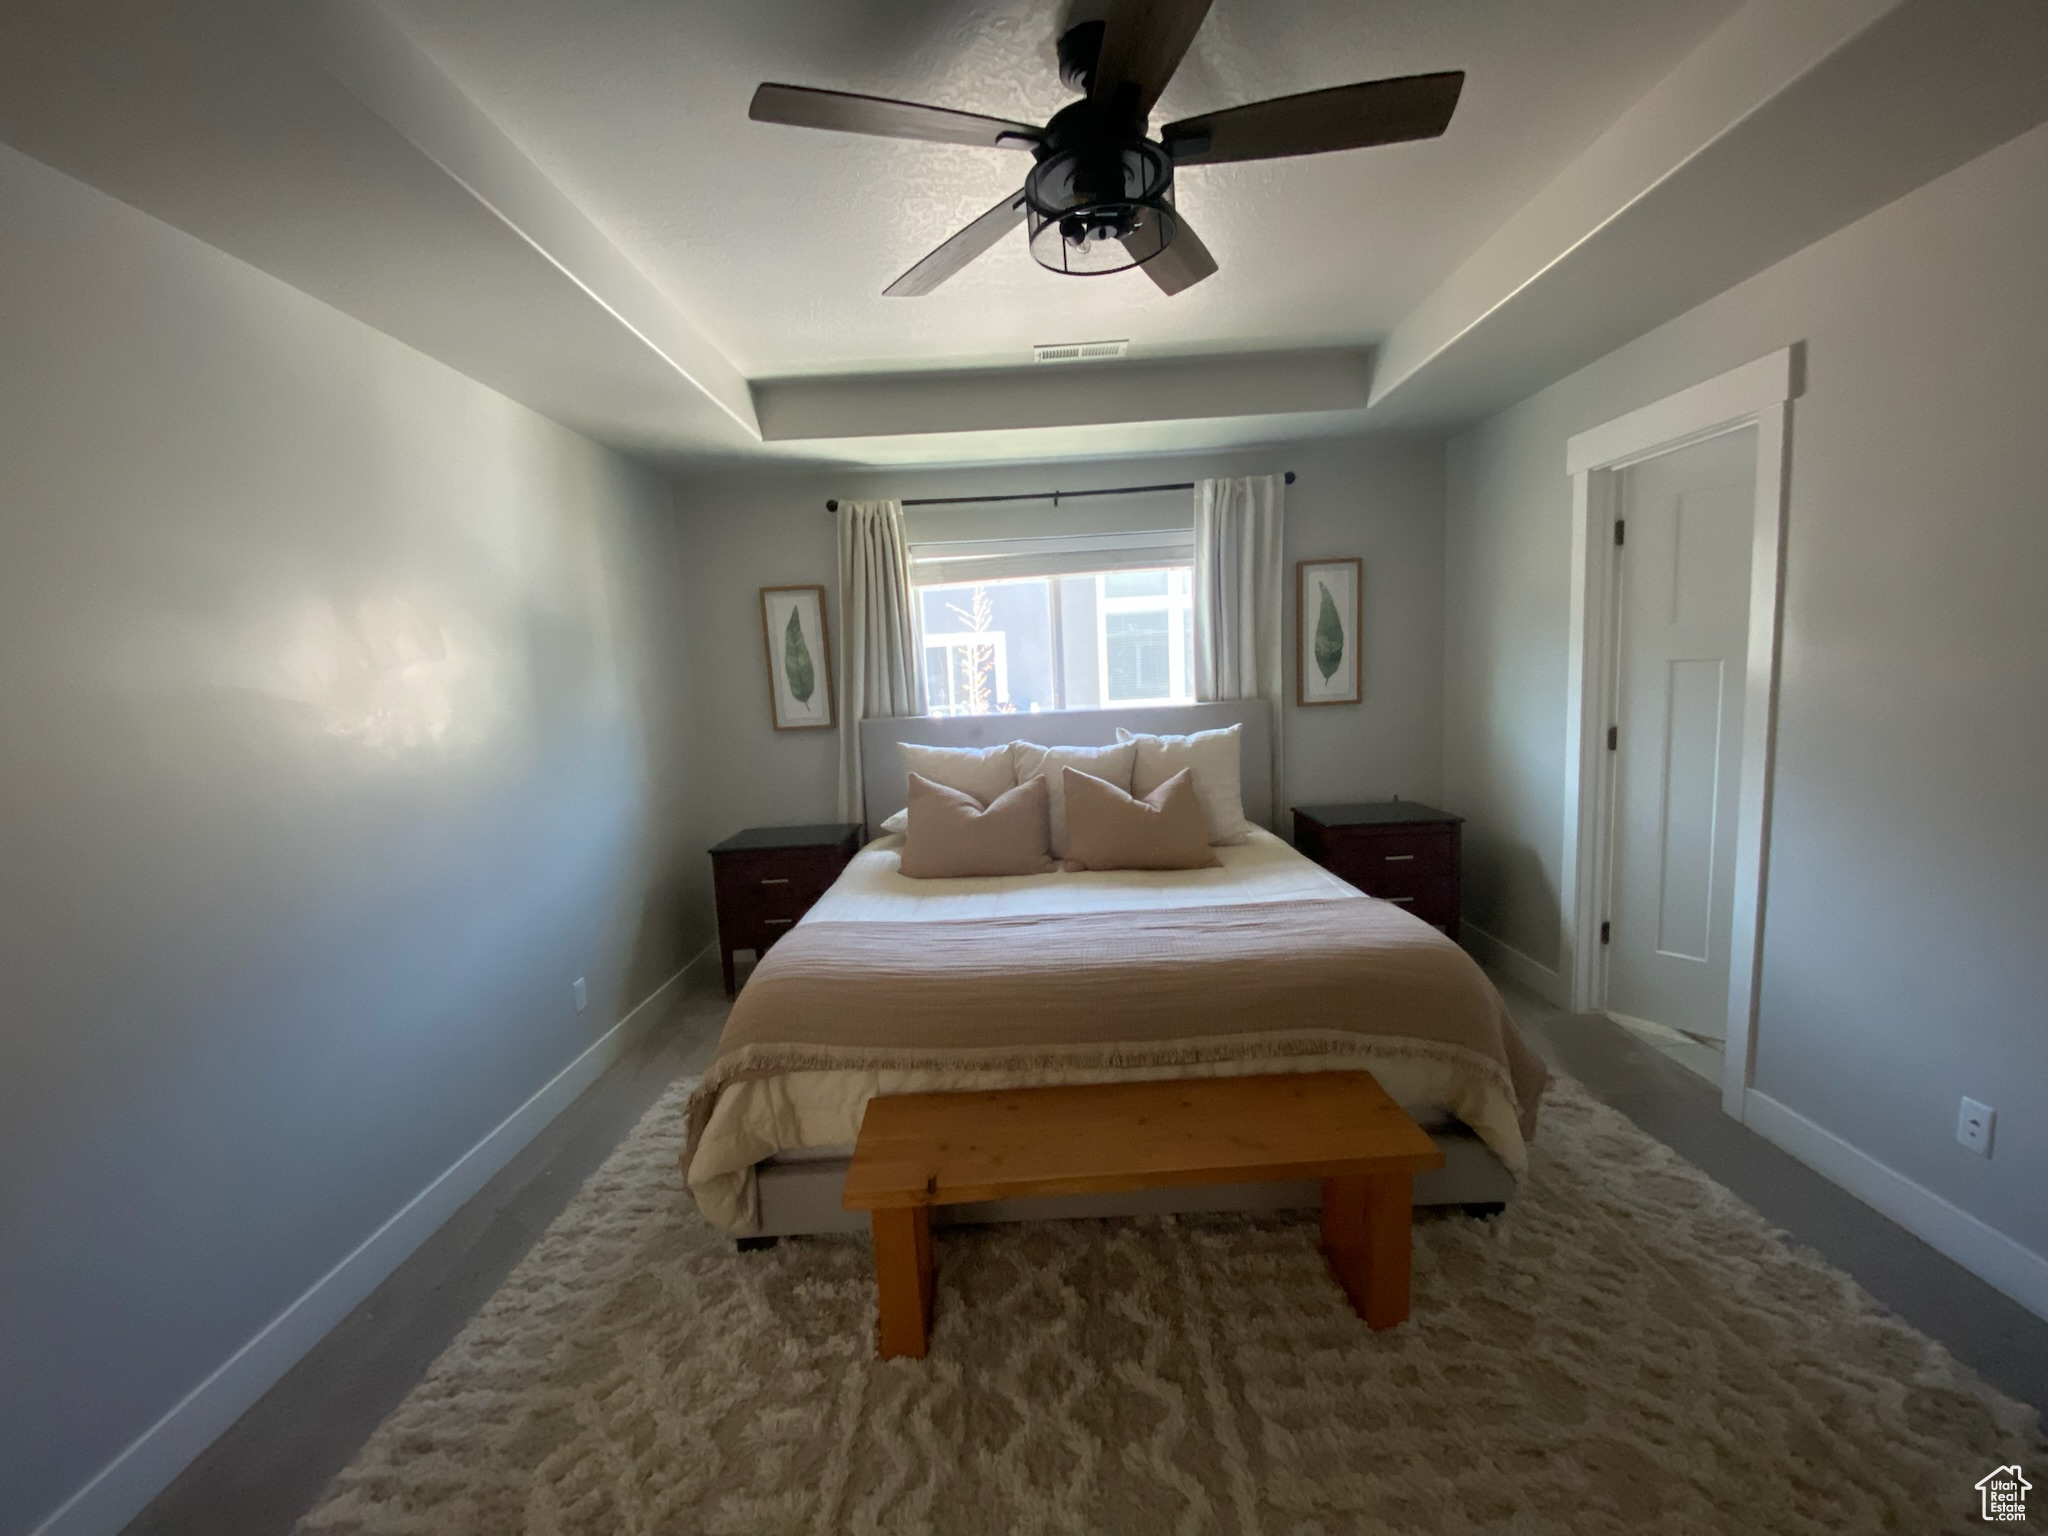 Bedroom with a raised ceiling and ceiling fan